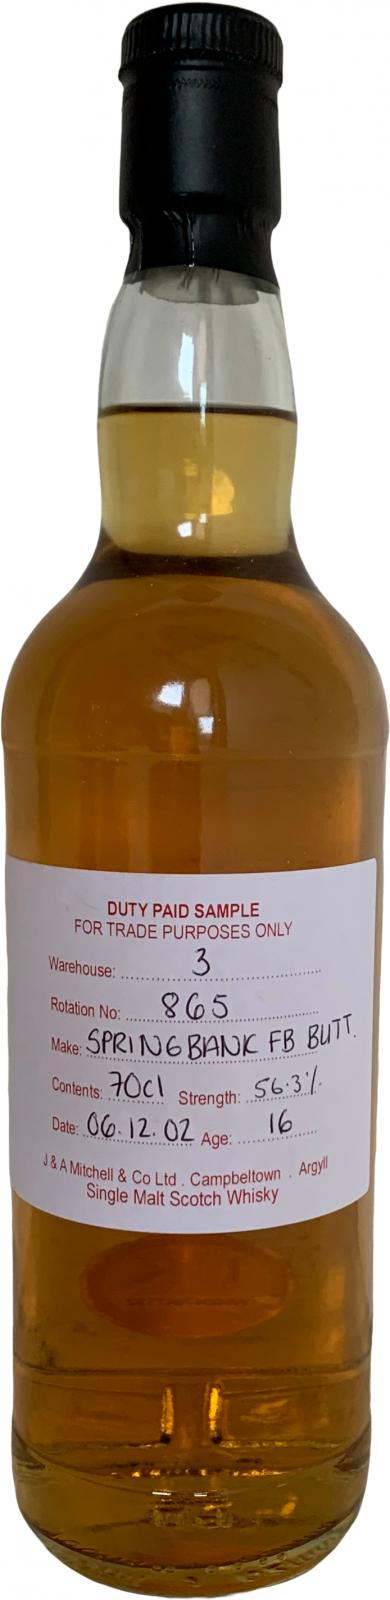 Springbank 2002 Duty Paid Sample For Trade Purposes Only Fresh Bourbon Butt Rotation 865 56.3% 700ml